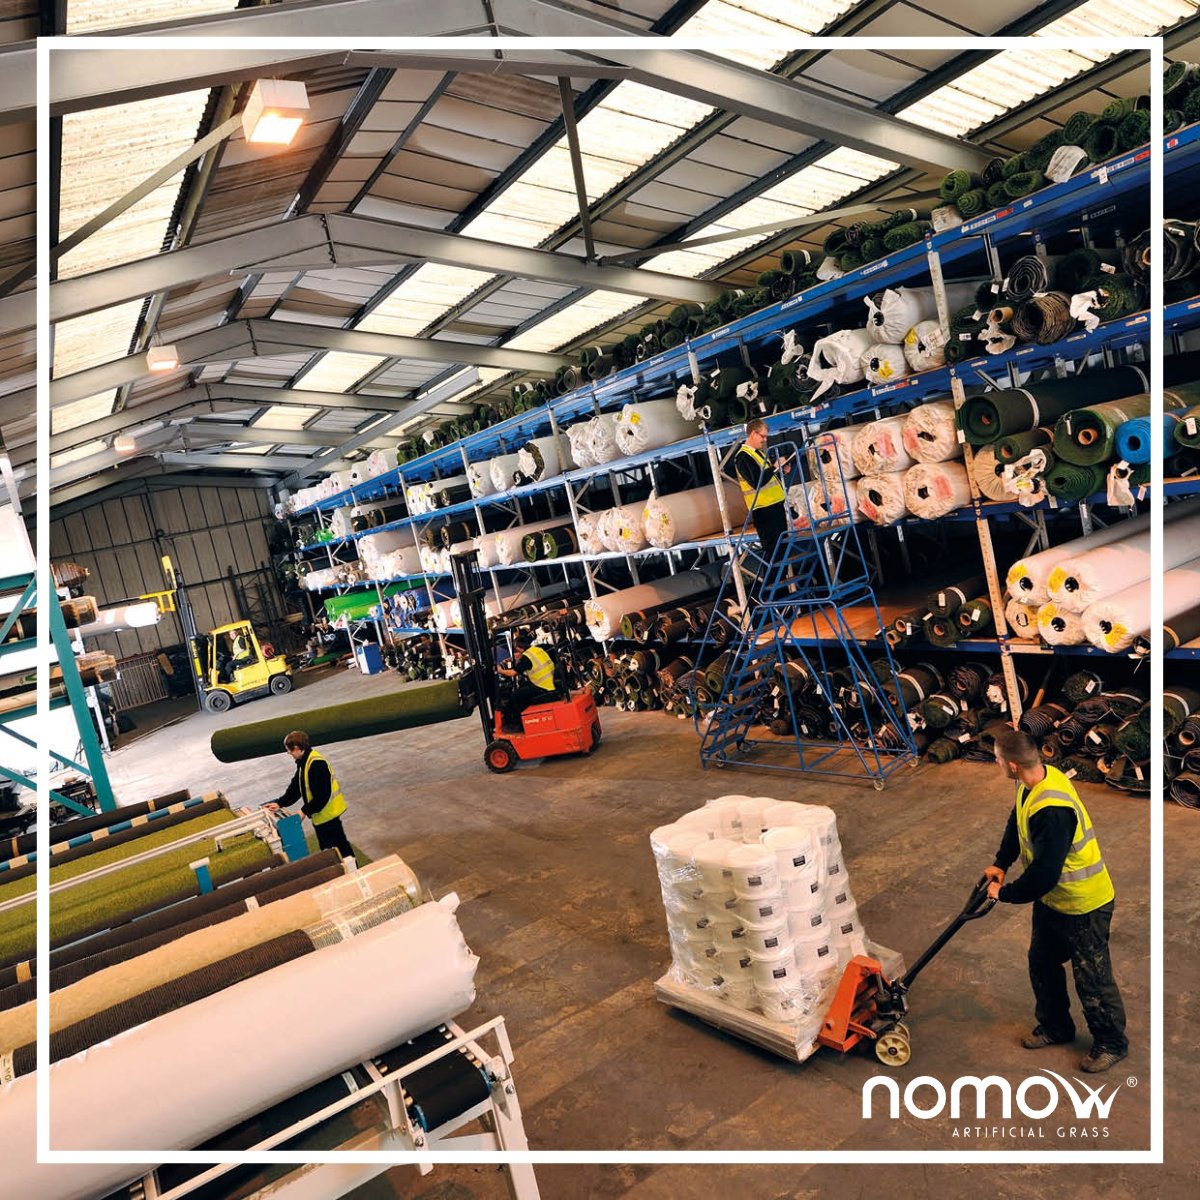 🚨 Reminder! Nomow's Warehouse Sale takes place this Saturday 11th! 

🌱 Don't miss out on our breath-taking deals.

☀️ Time to create the garden of your dream with Nomow's artificial grass!

 #Nomow #ArtificialGrass #Gardening #warehousesale #reminder #deals